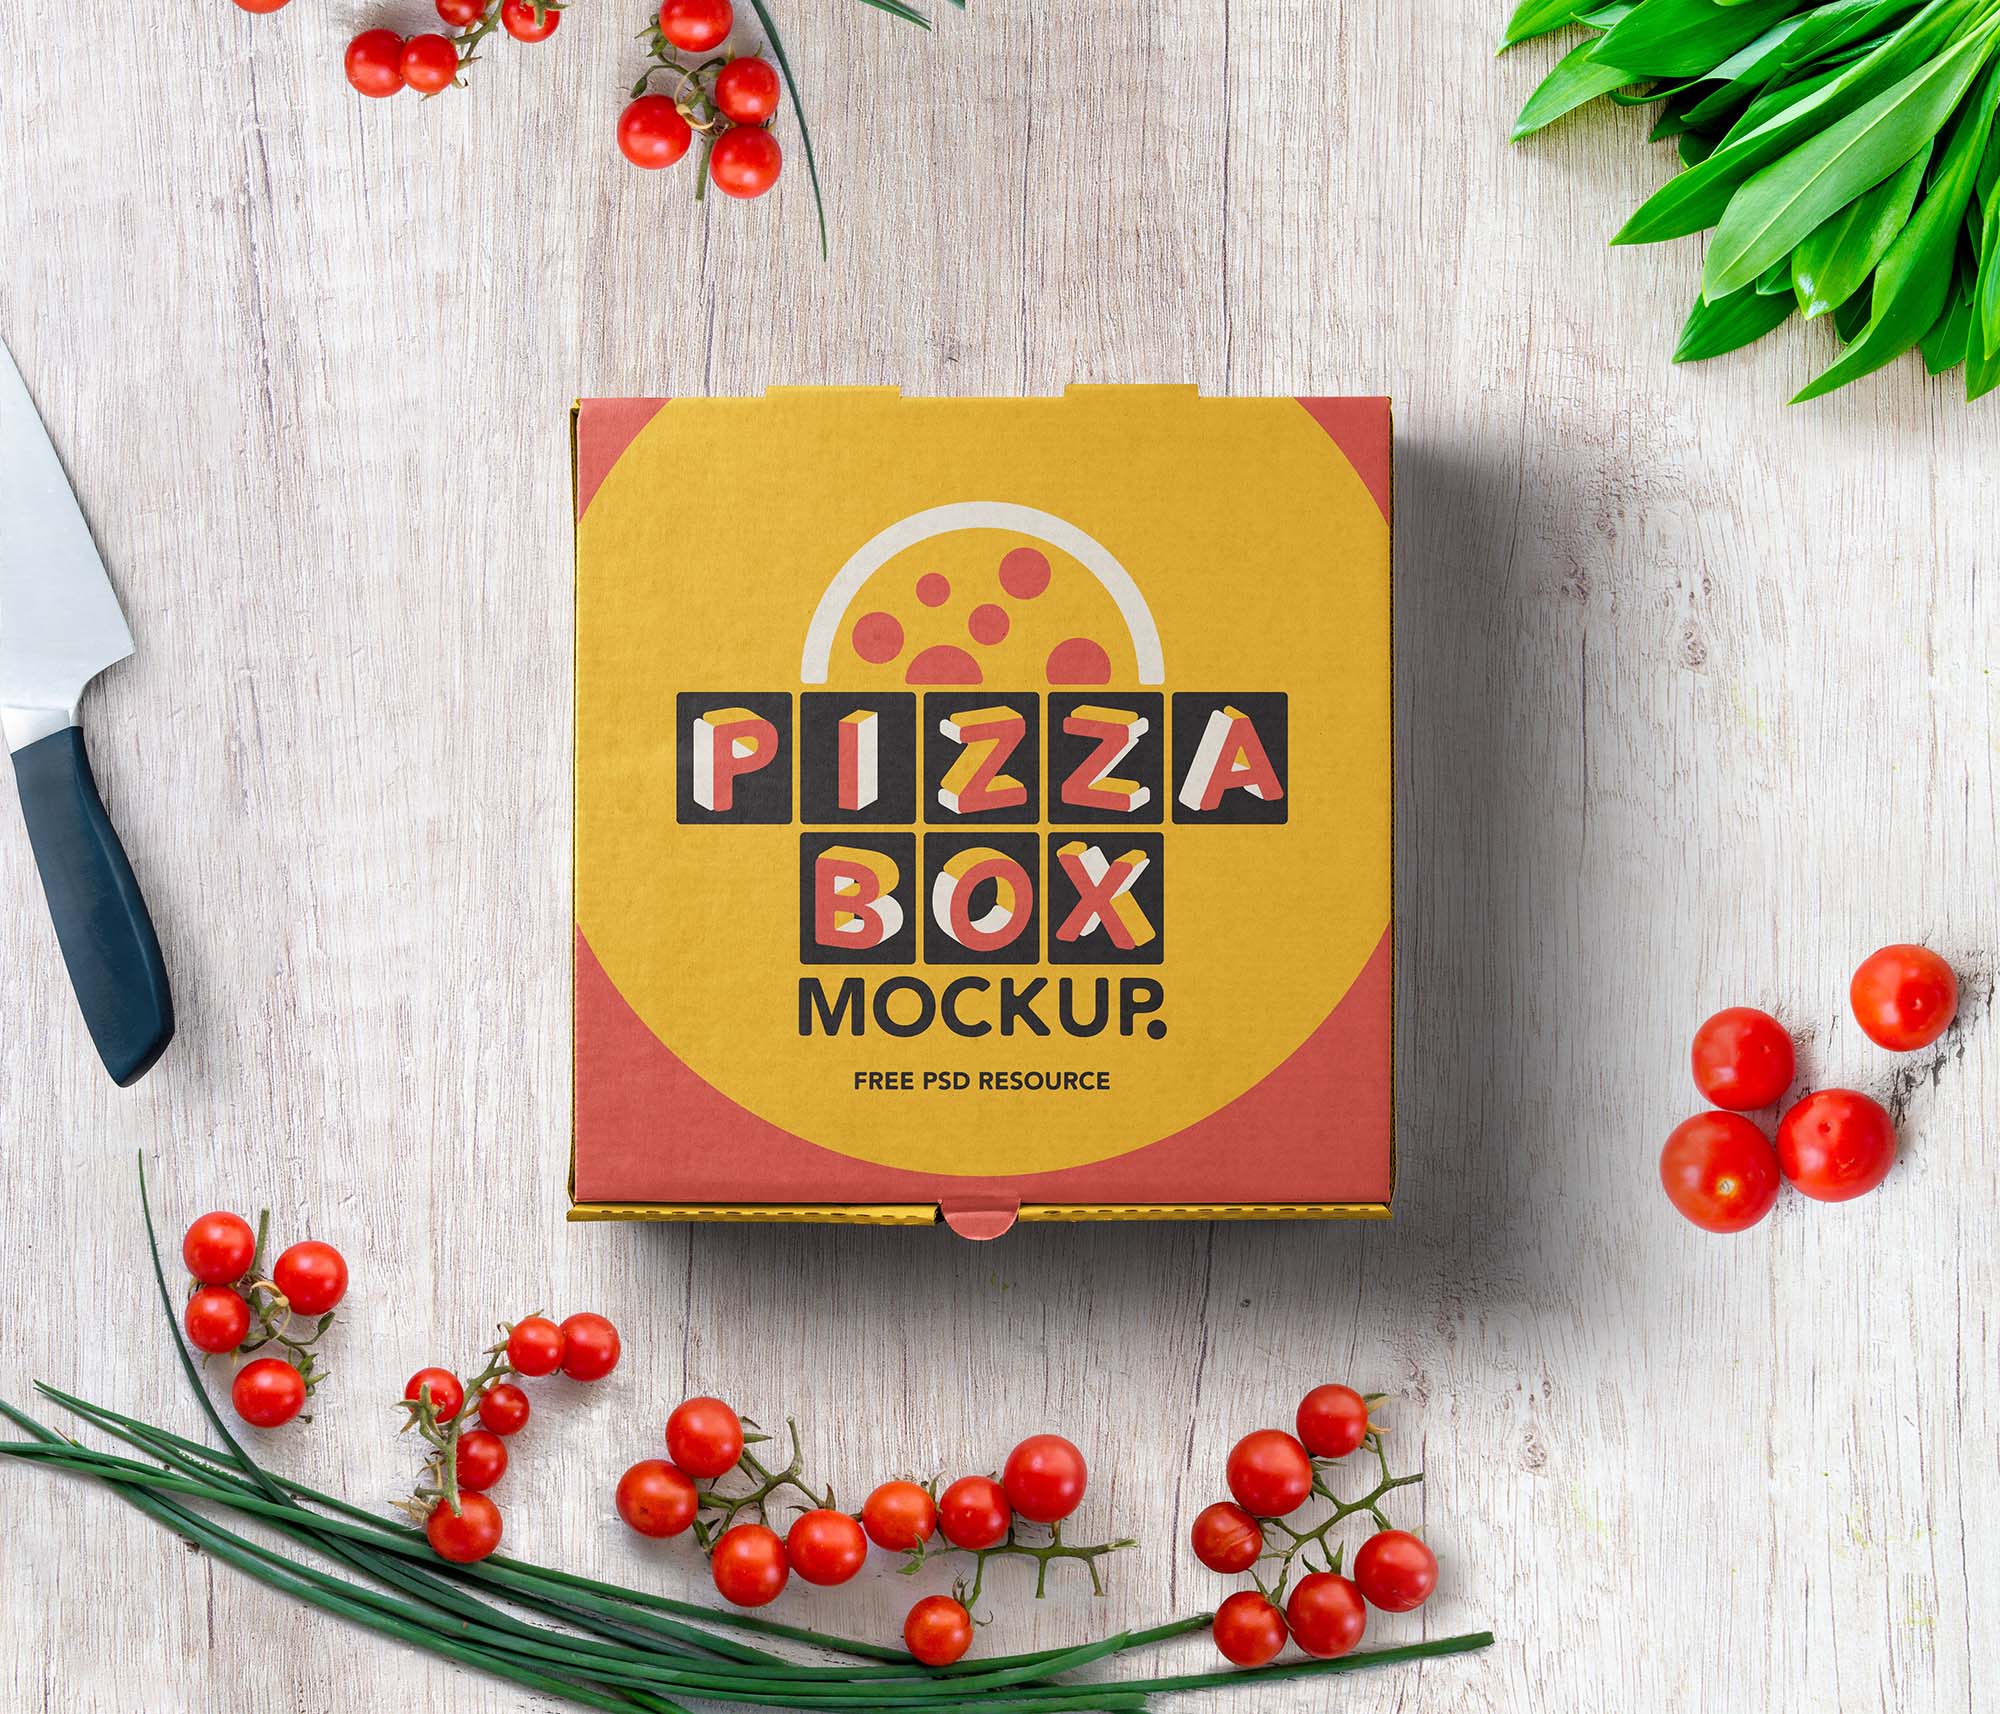 Top Pizza Box Package Mockup